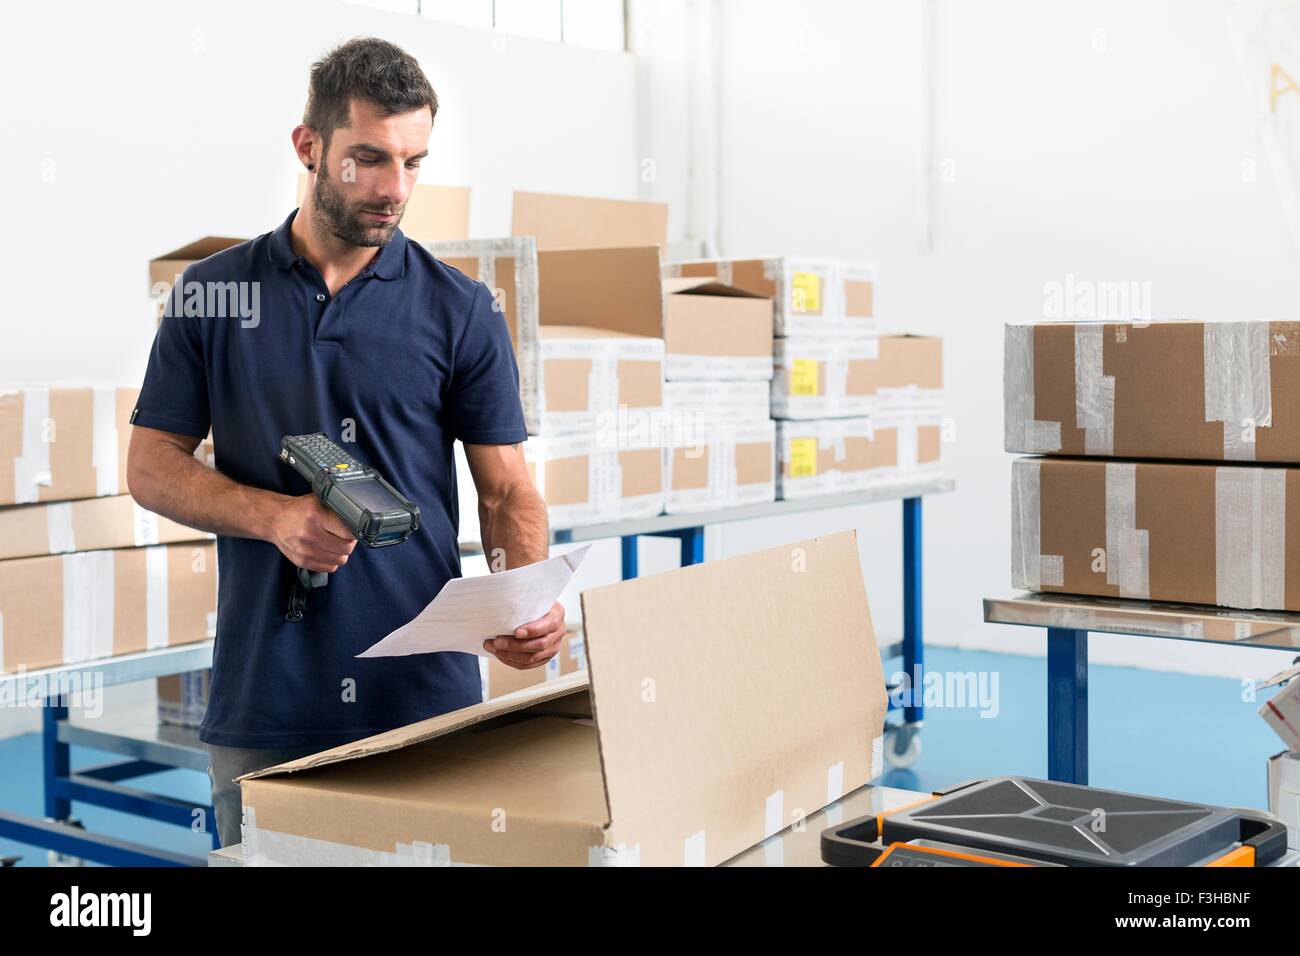 Warehouse worker scanning paperwork in distribution warehouse Stock Photo